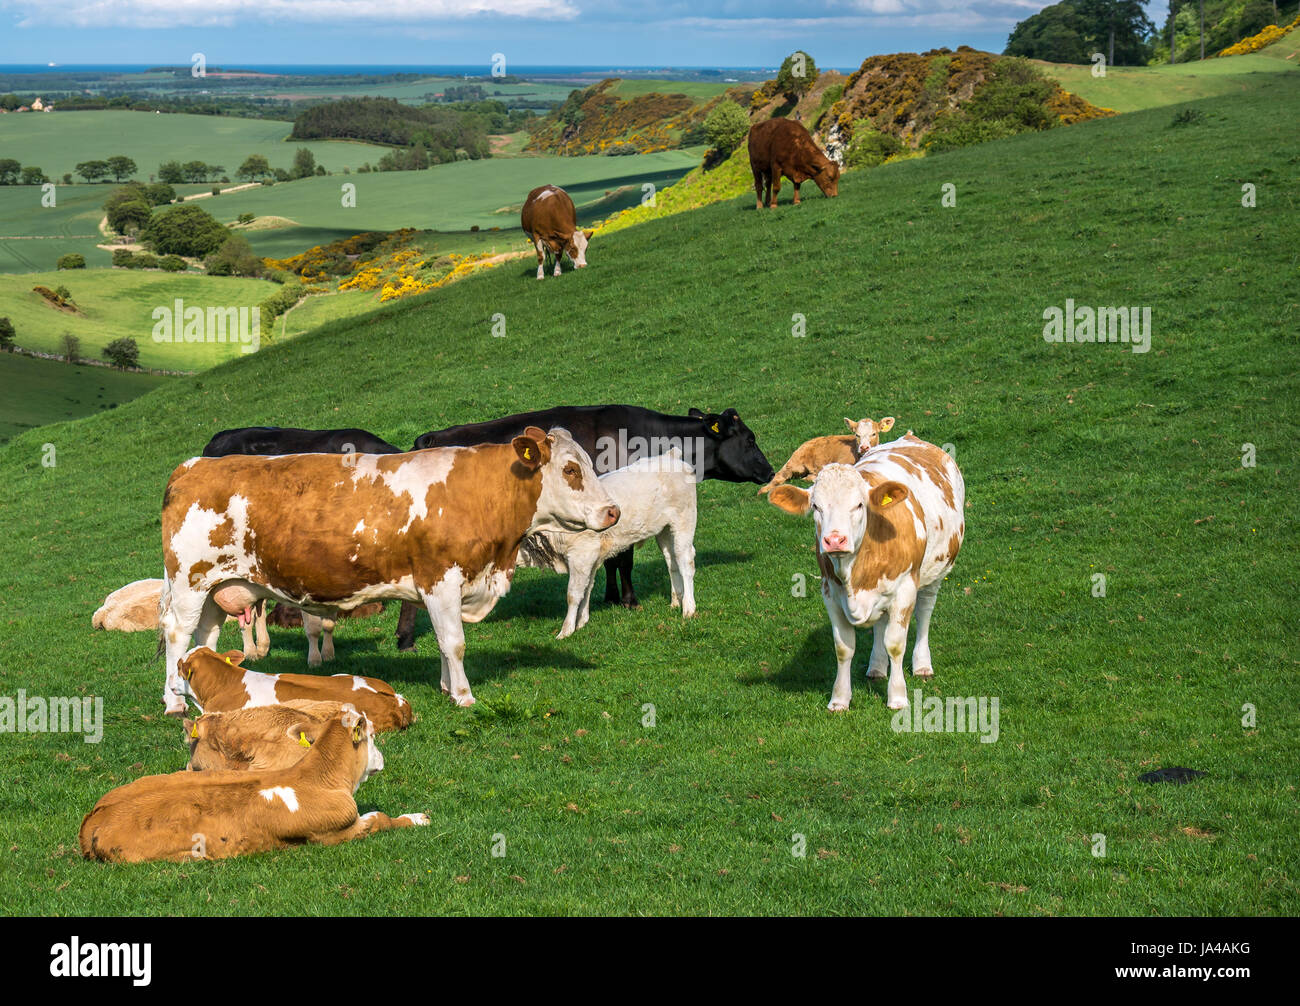 Small group of Jersey cows and calves in green field on hillside with landscape and sea view in background, East Lothian, Scotland, UK Stock Photo